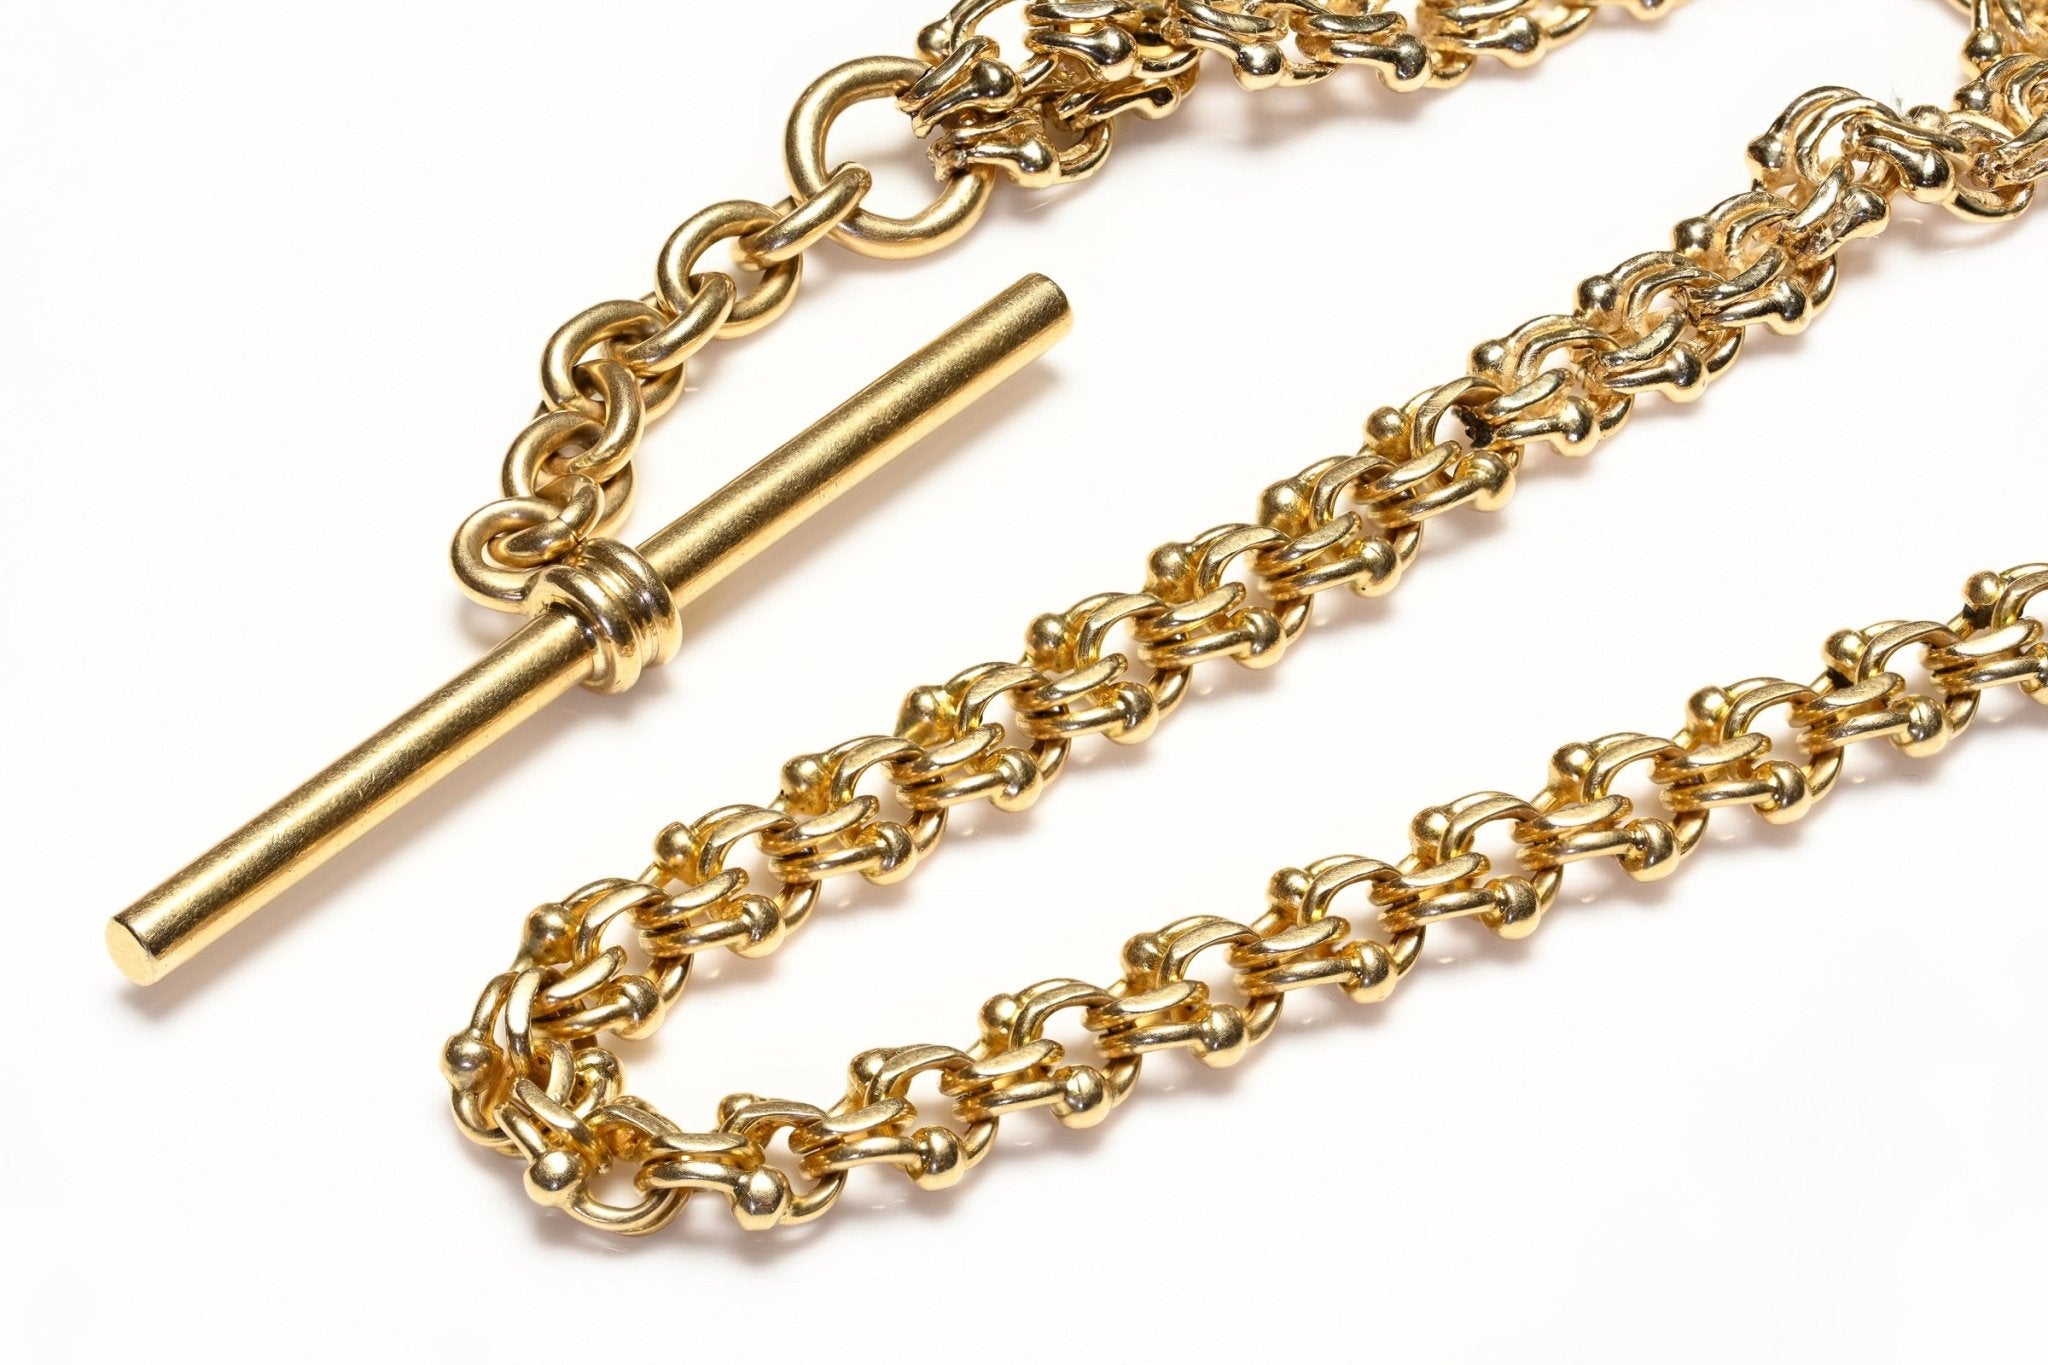 Antique Yellow Gold Pocket Watch Chain with Bar - DSF Antique Jewelry